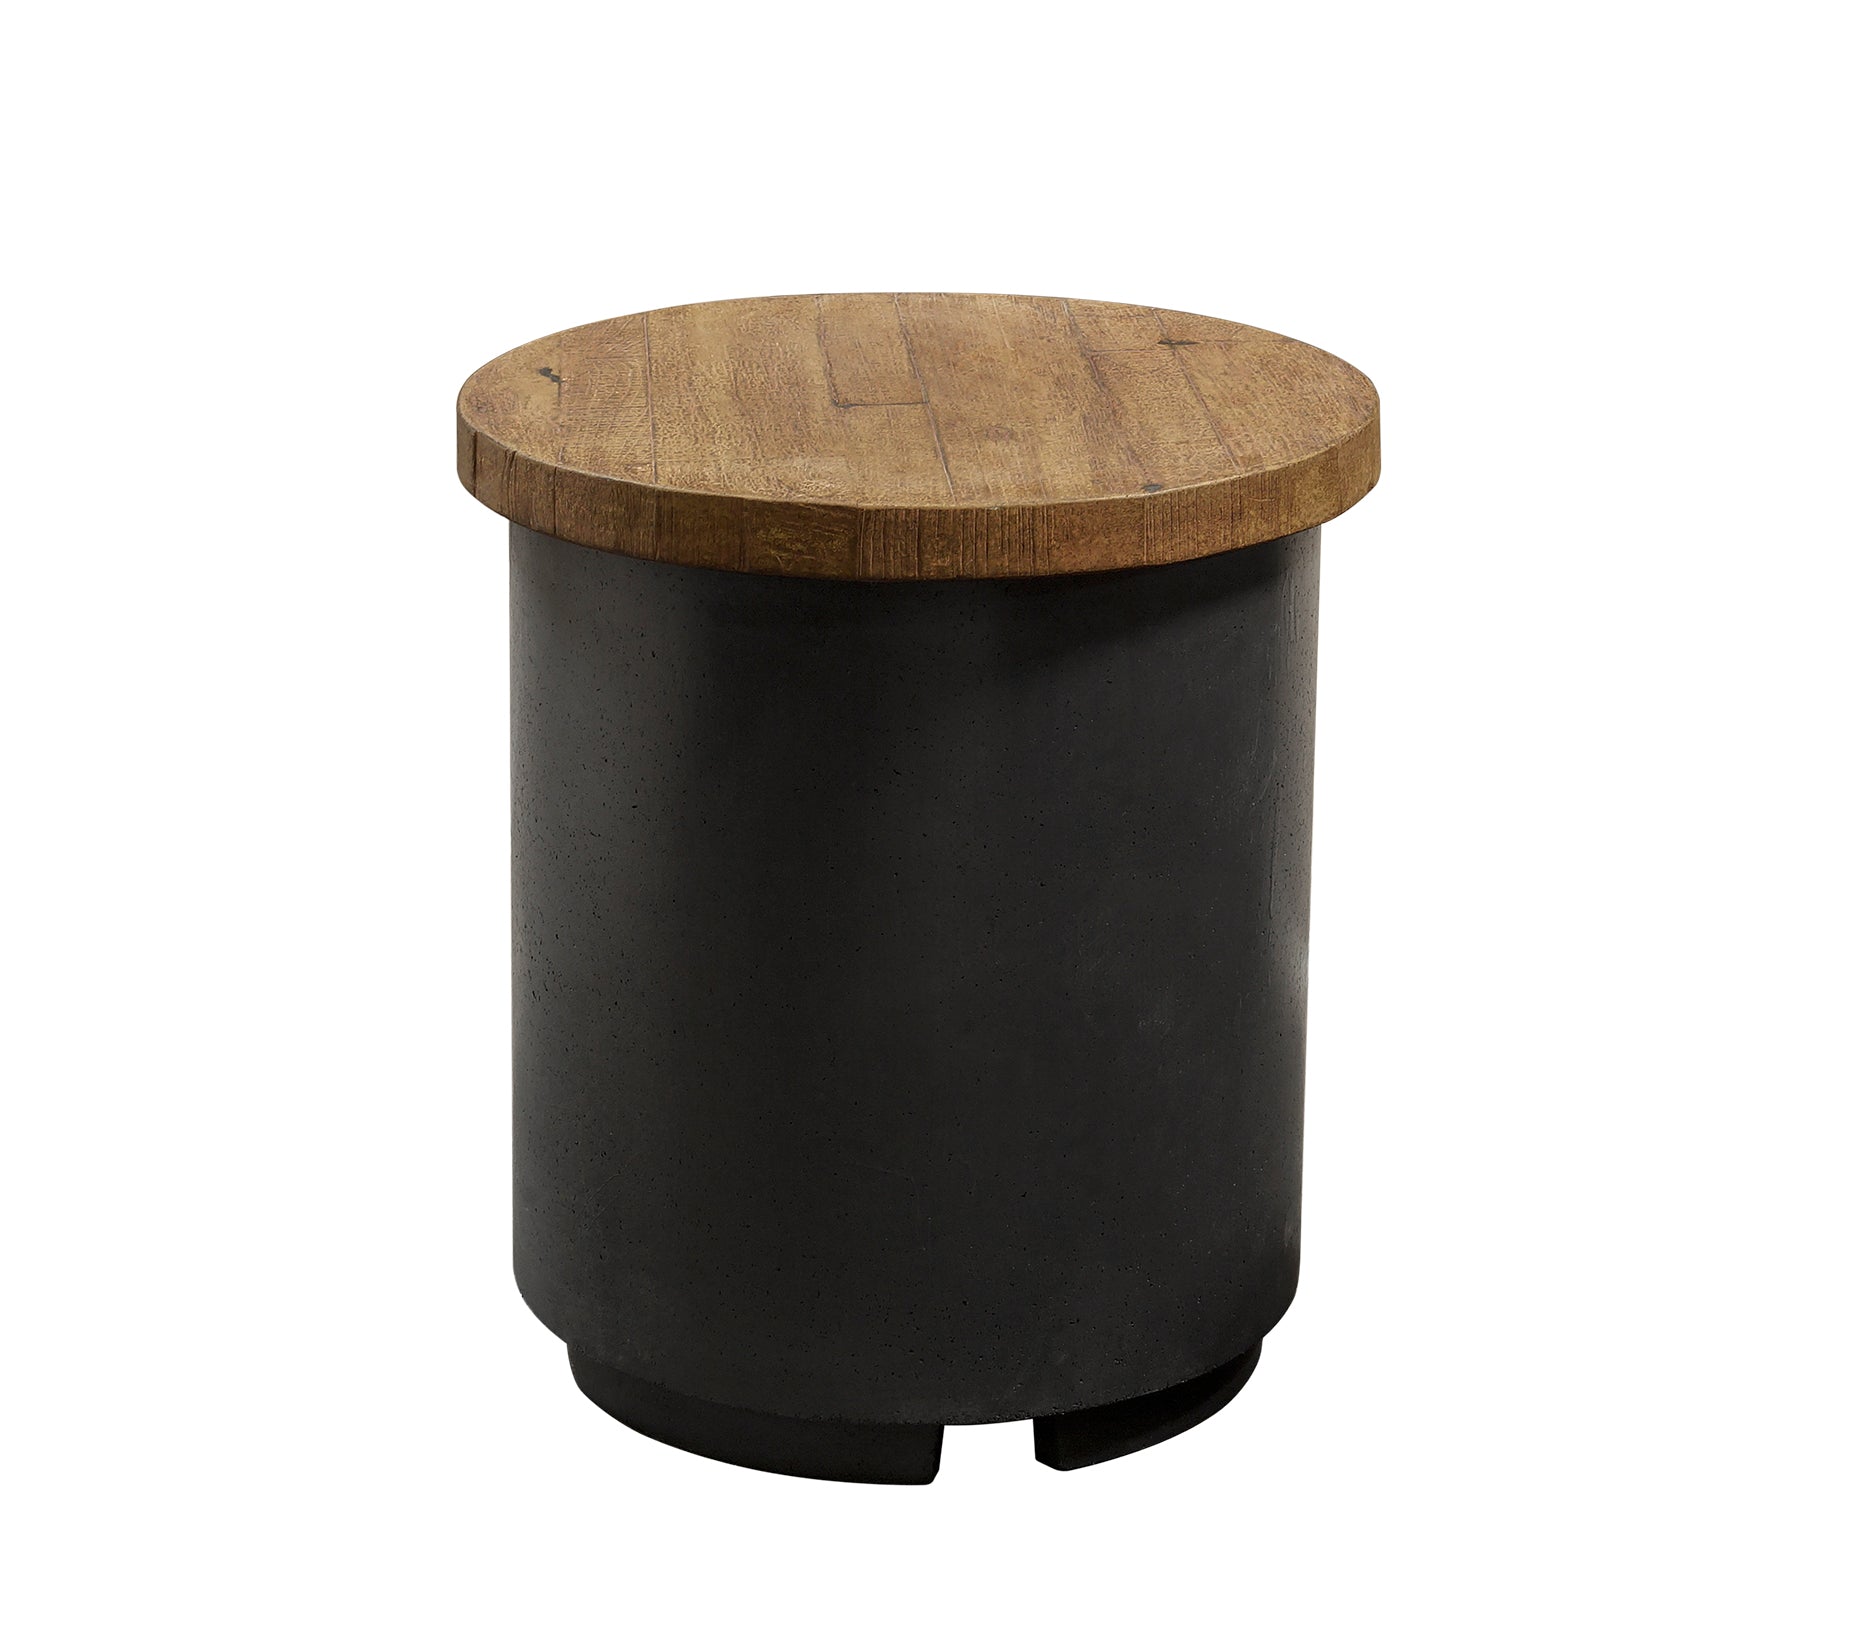 Contempo Reclaimed Wood Propane Tank Cover / End Table by American Fyre Design